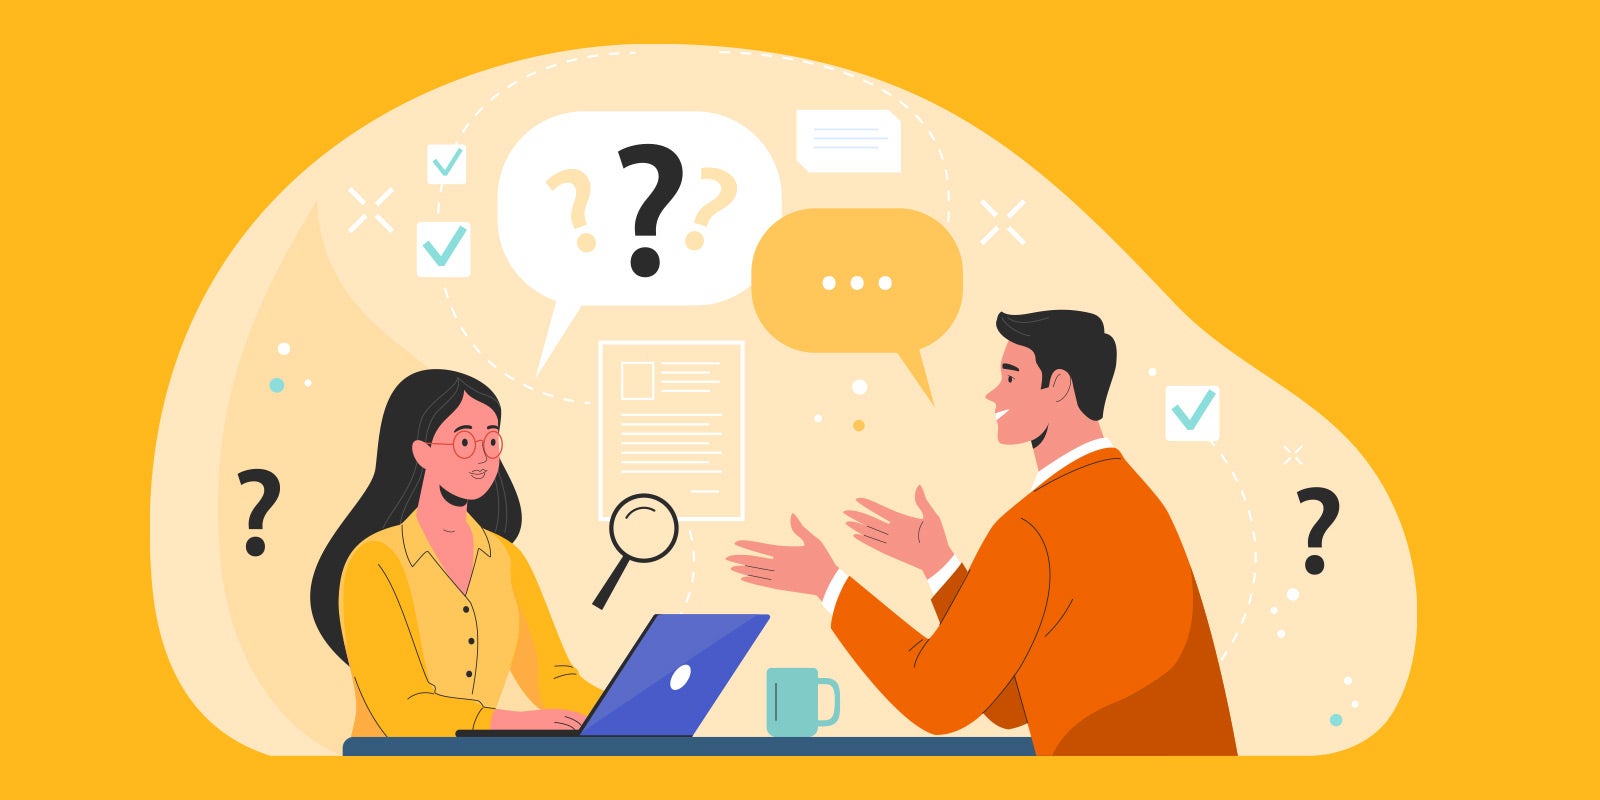 illustration of a woman interviewer sitting behind a computer interviewing a male interviewee with question marks in the air above them to show this blog is about understanding great behavioral interviewing questions